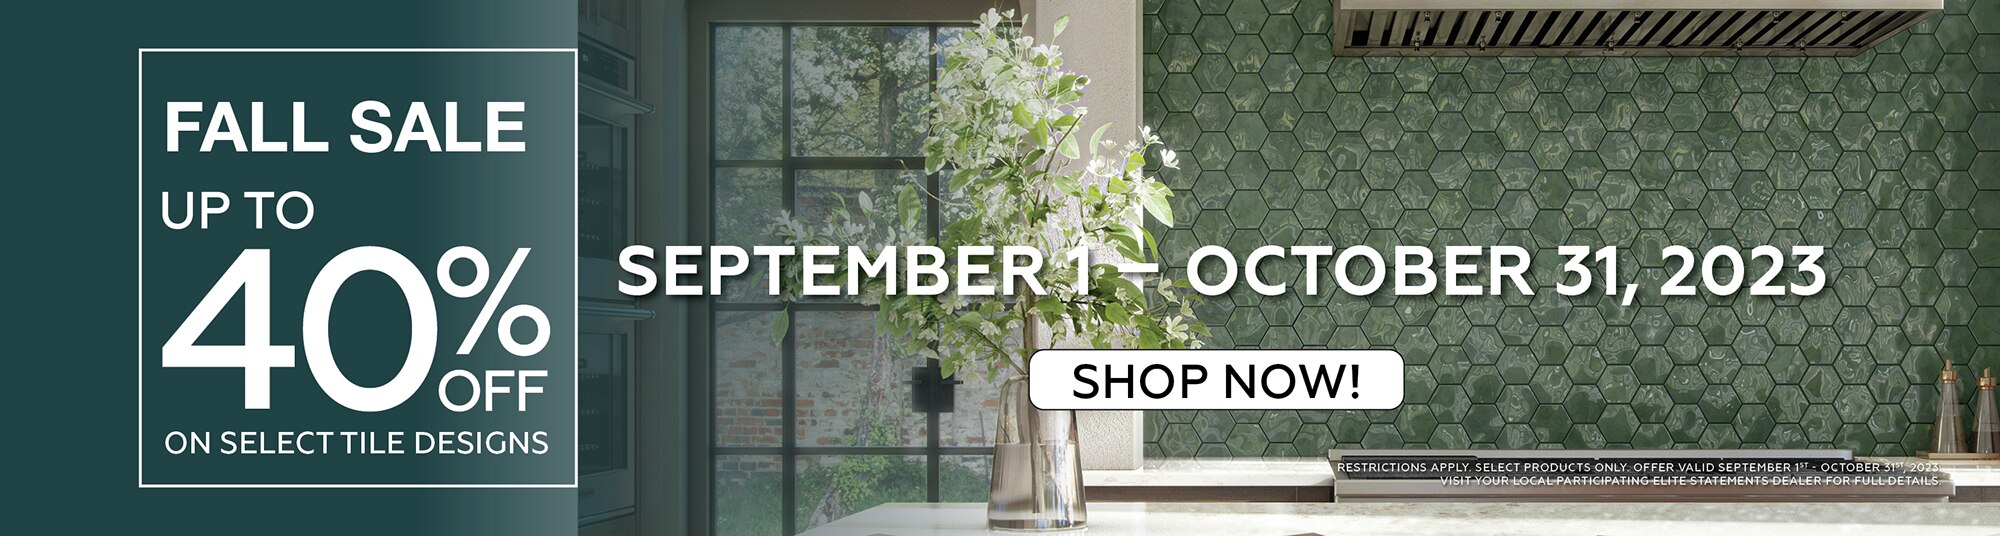 Fall Sale Up to 40-percent off on select tile designs September 1 through October 31 2023